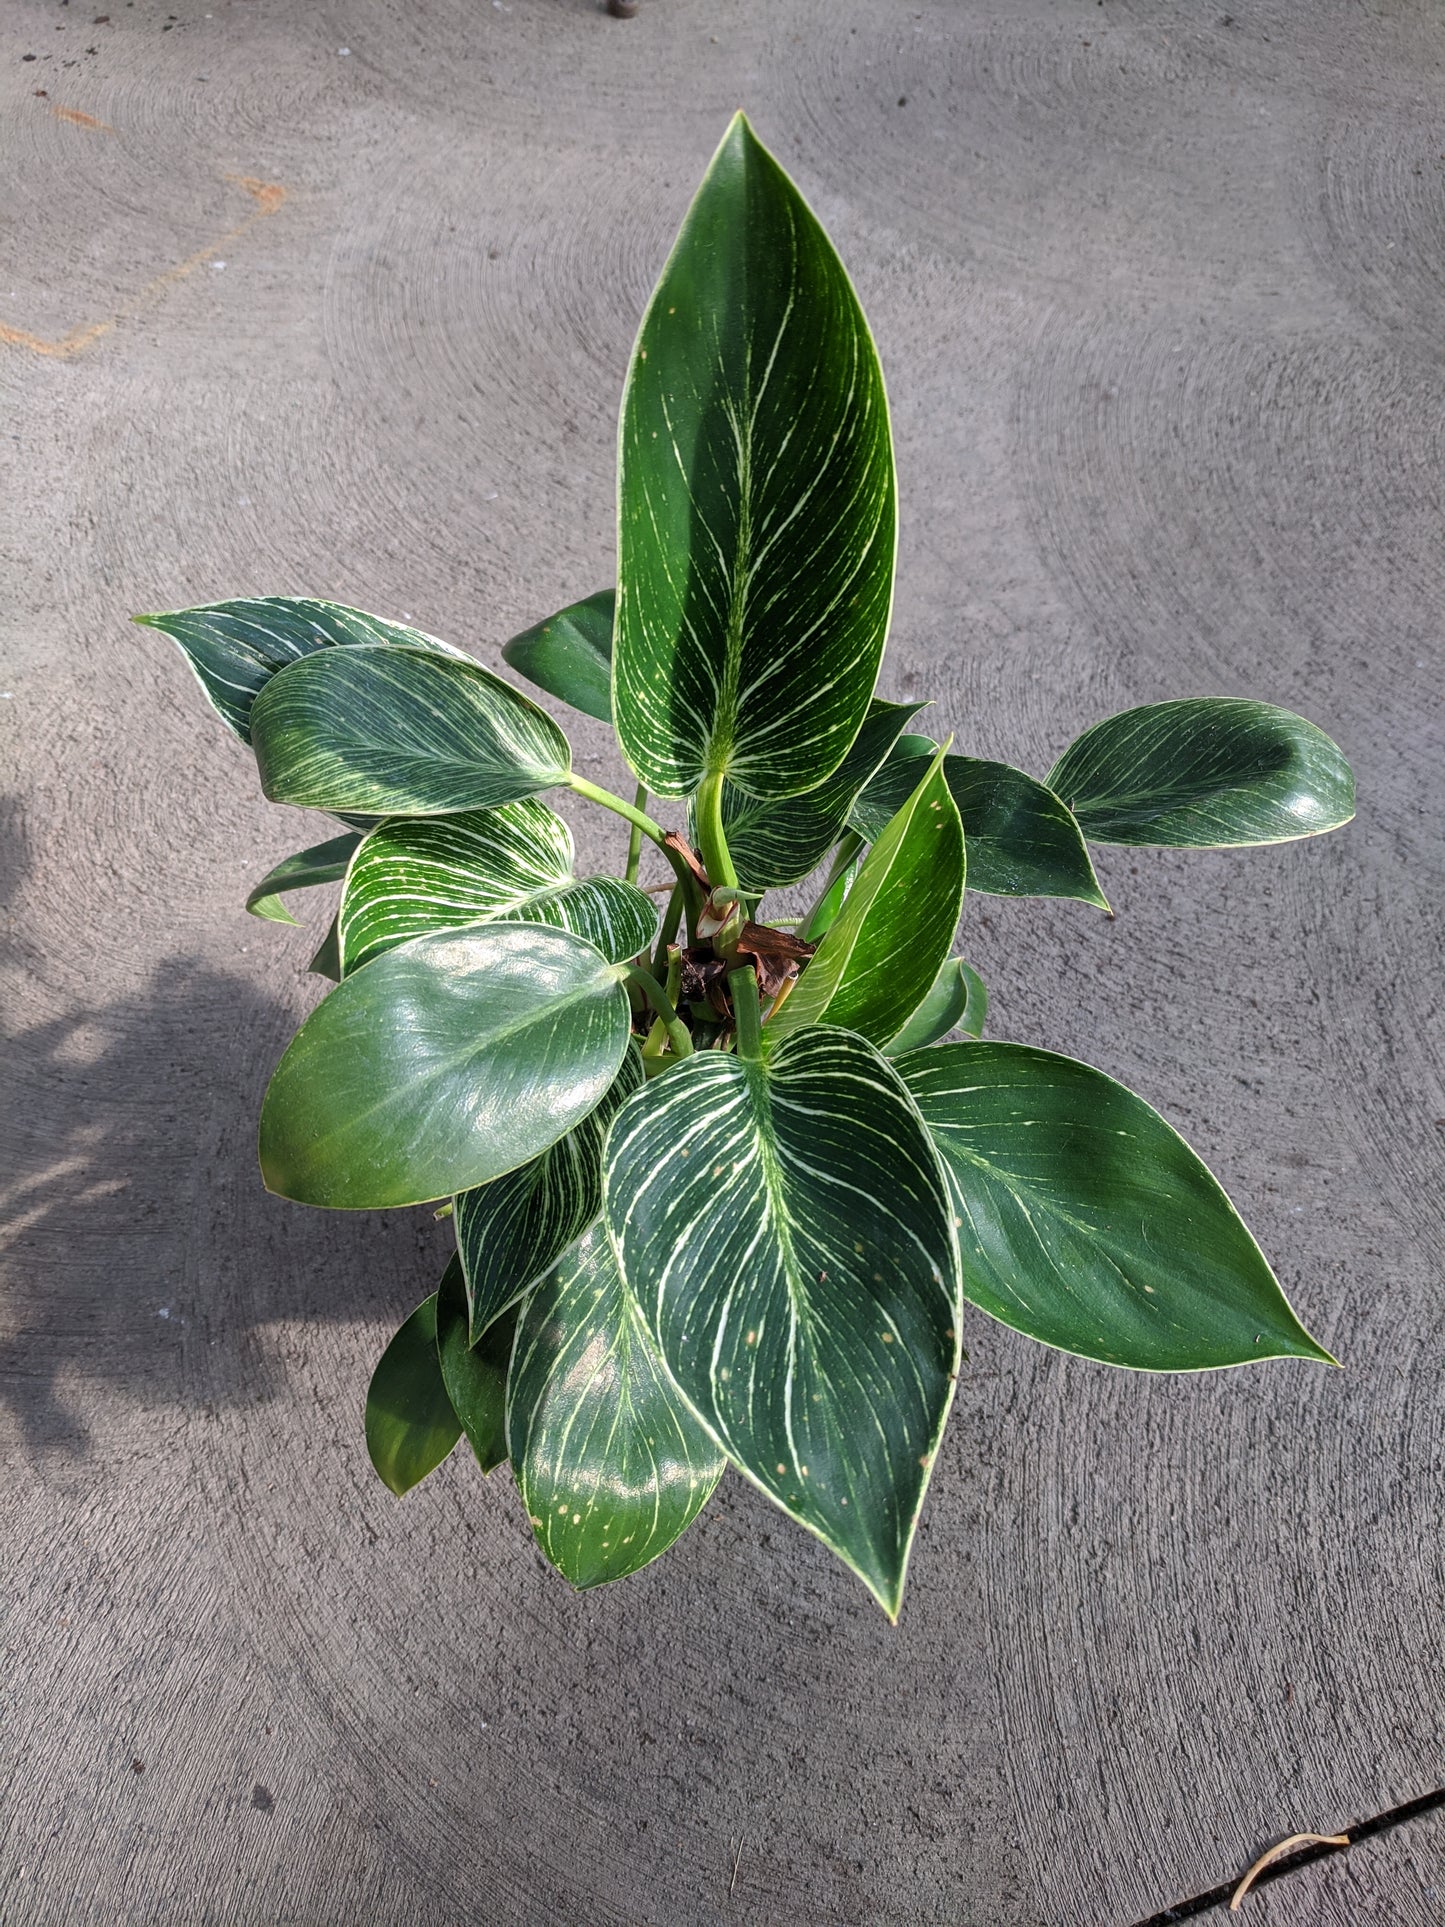 Hybrid philodendron 4"